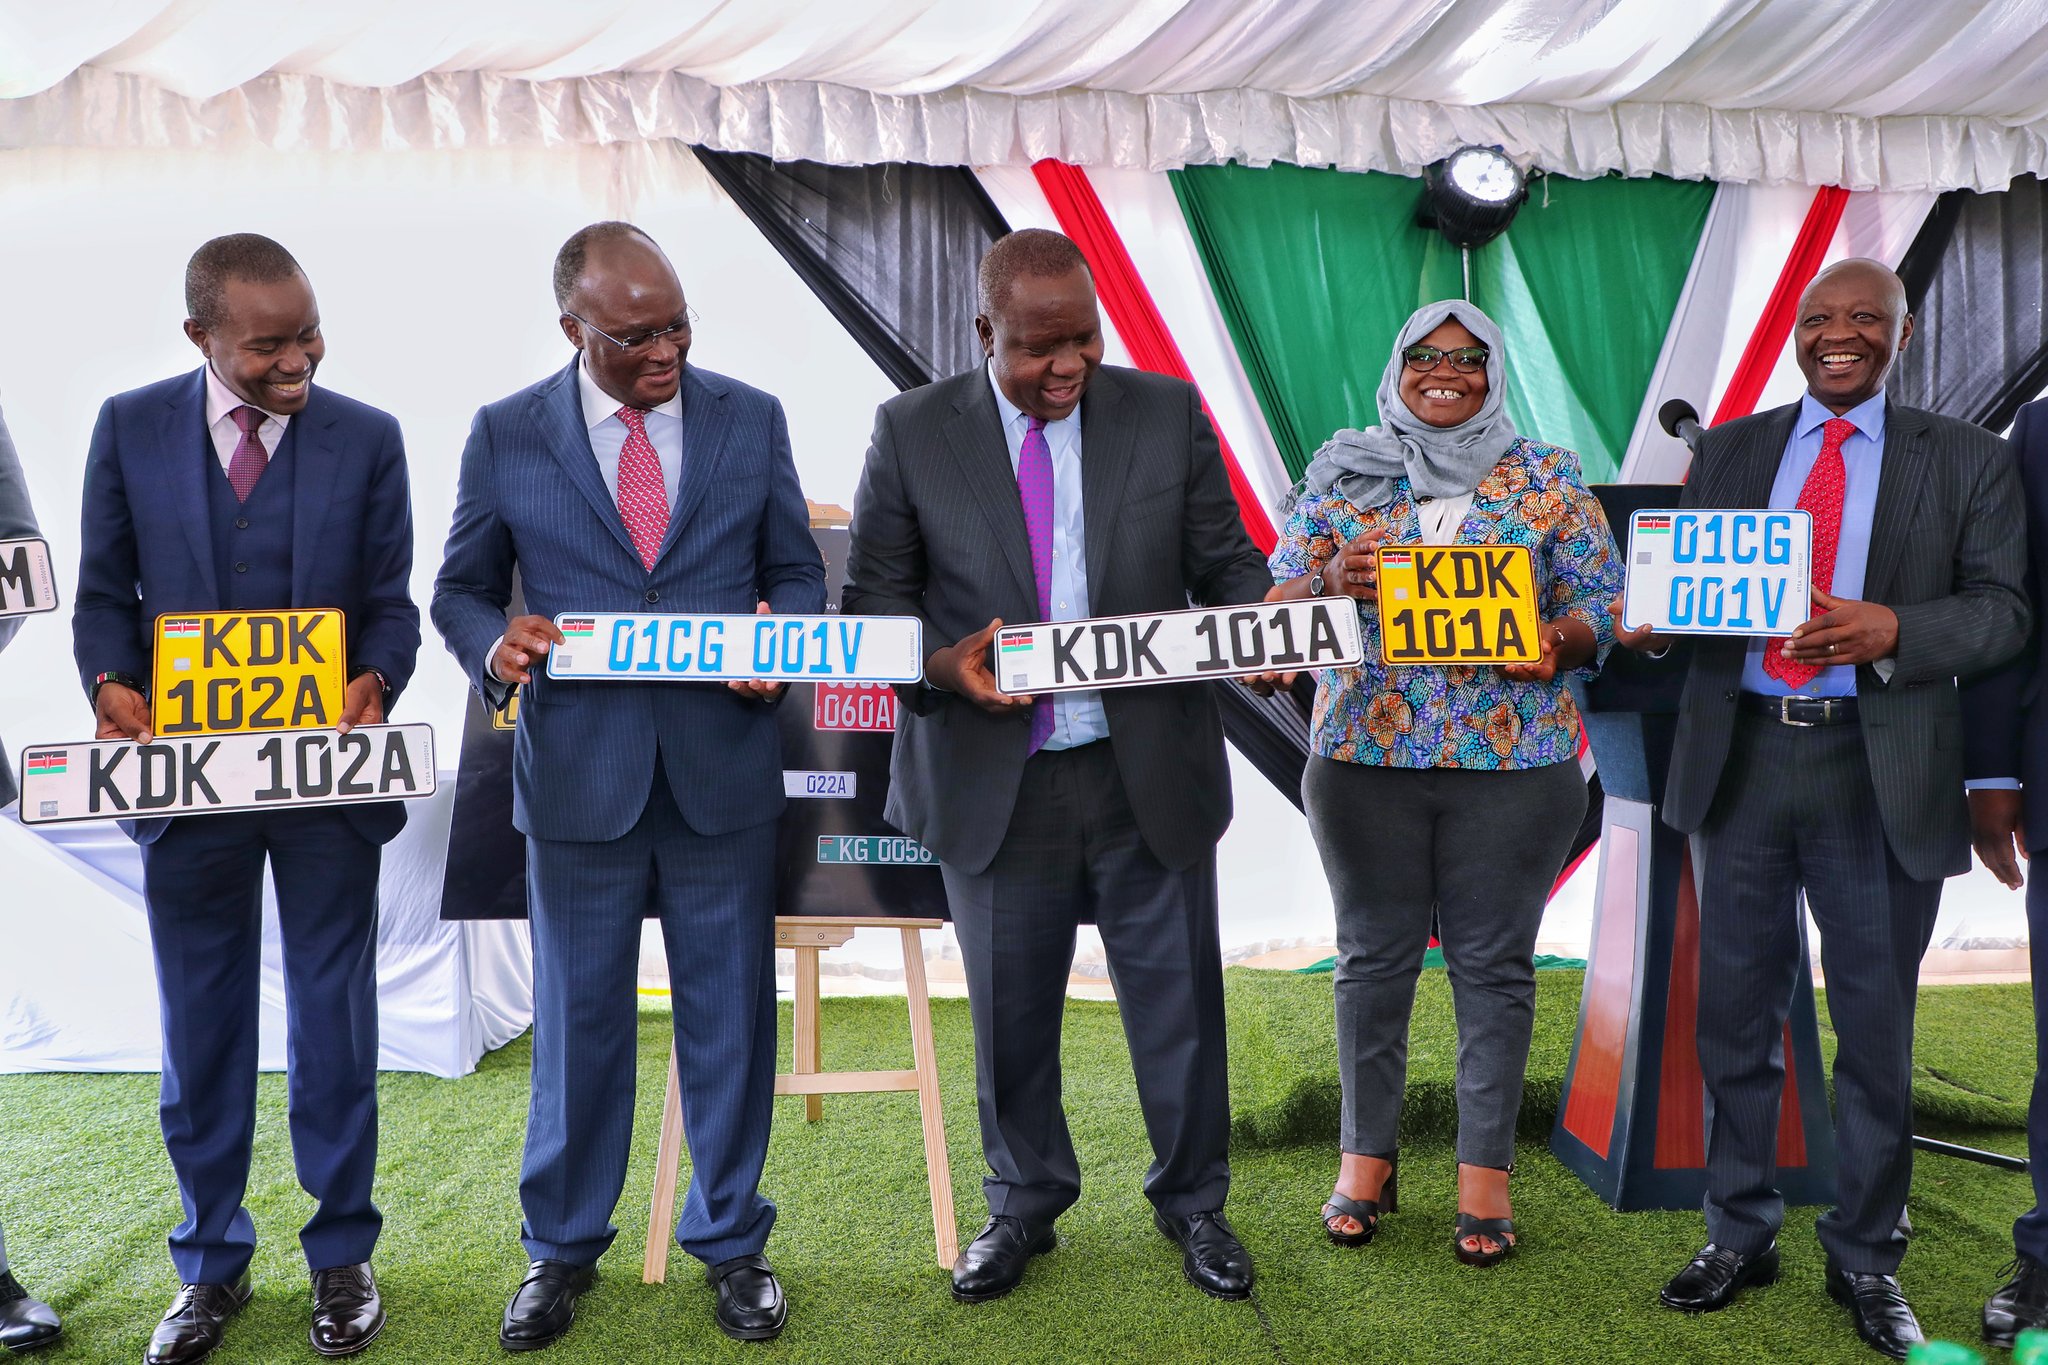 Joe Mucheru, James Macharia and Fred Matiang'i during commissioning new generation number plates. PHOTO/TWITTER